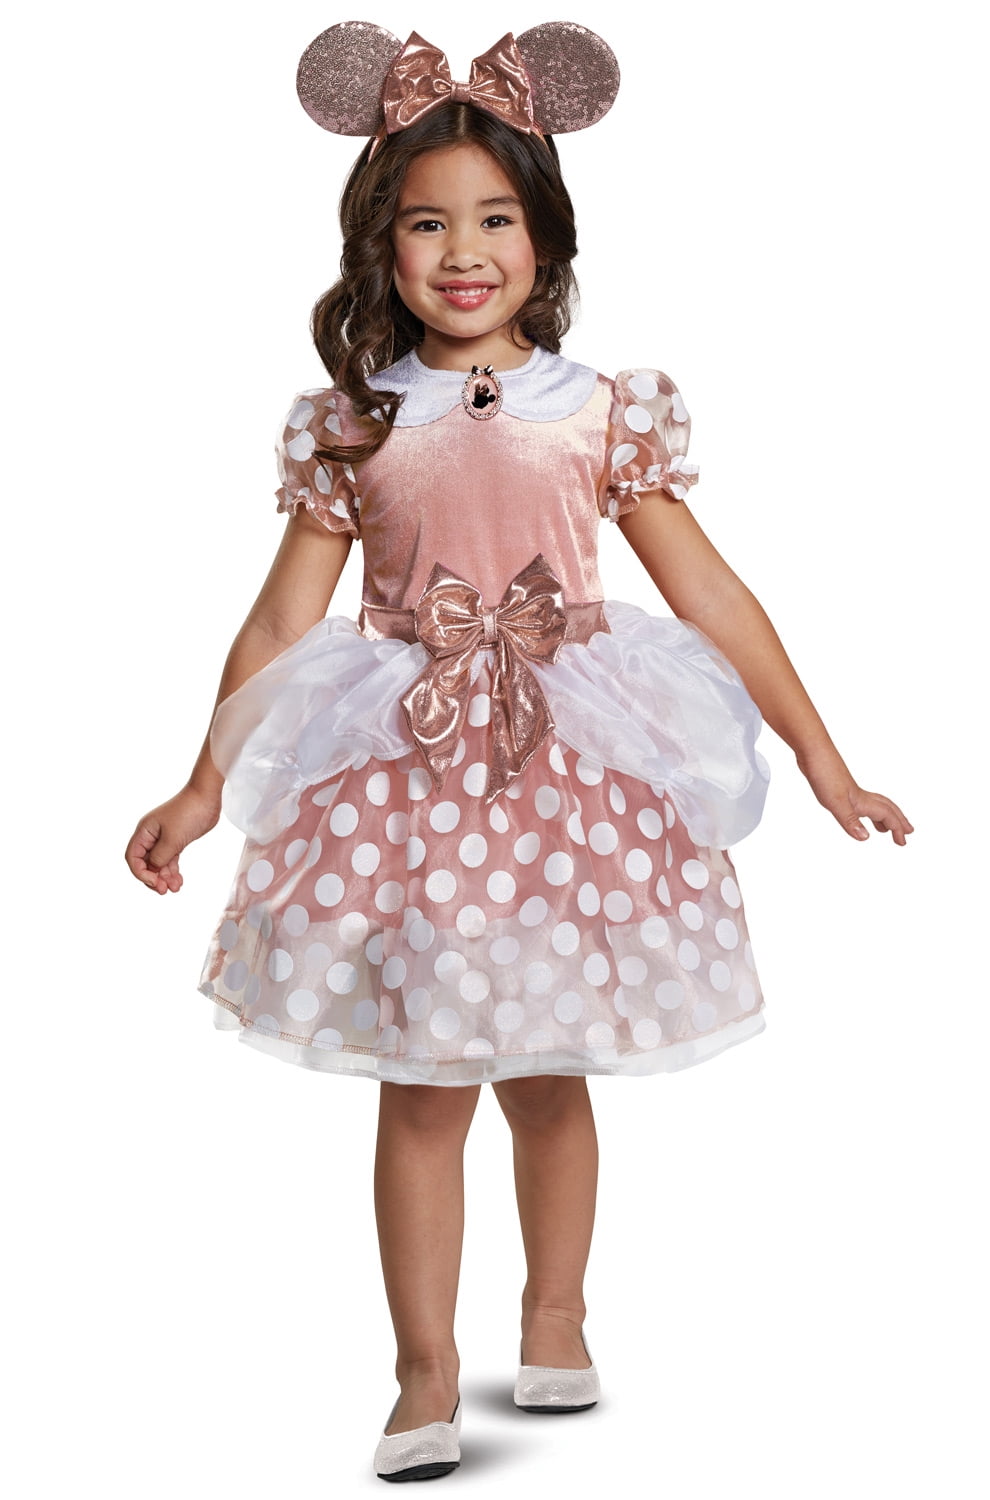 Toddler Girls Rose Gold Minnie Mouse Costume size 2T - Walmart.com